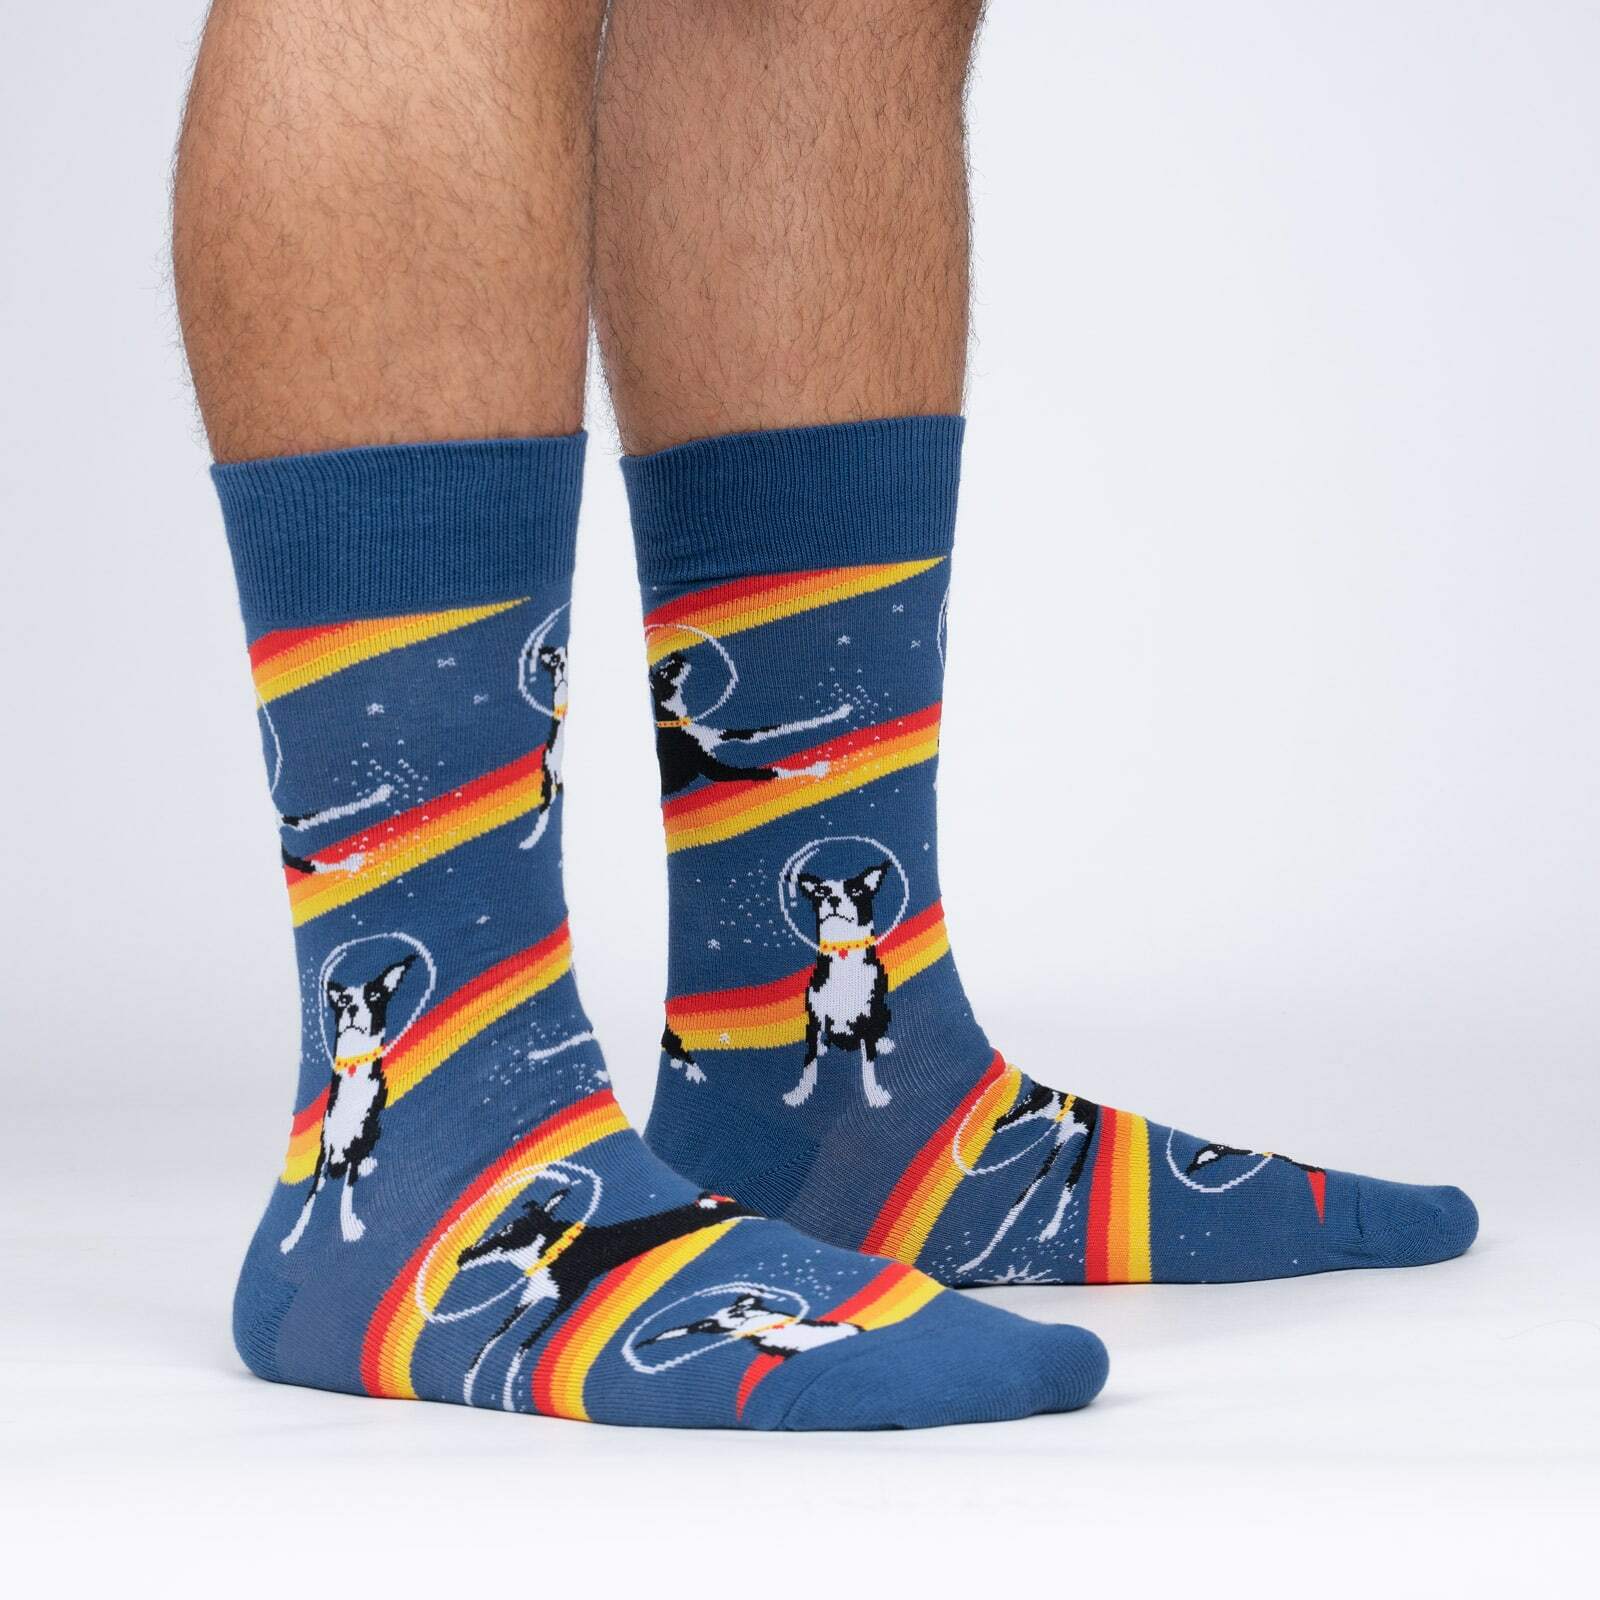 Sock It To Me Astro Puppy men's crew sock featuring blue sock with orange, red, and yellow stripes all over and dog in astronaut helmet. Socks worn by model seen from the side. 